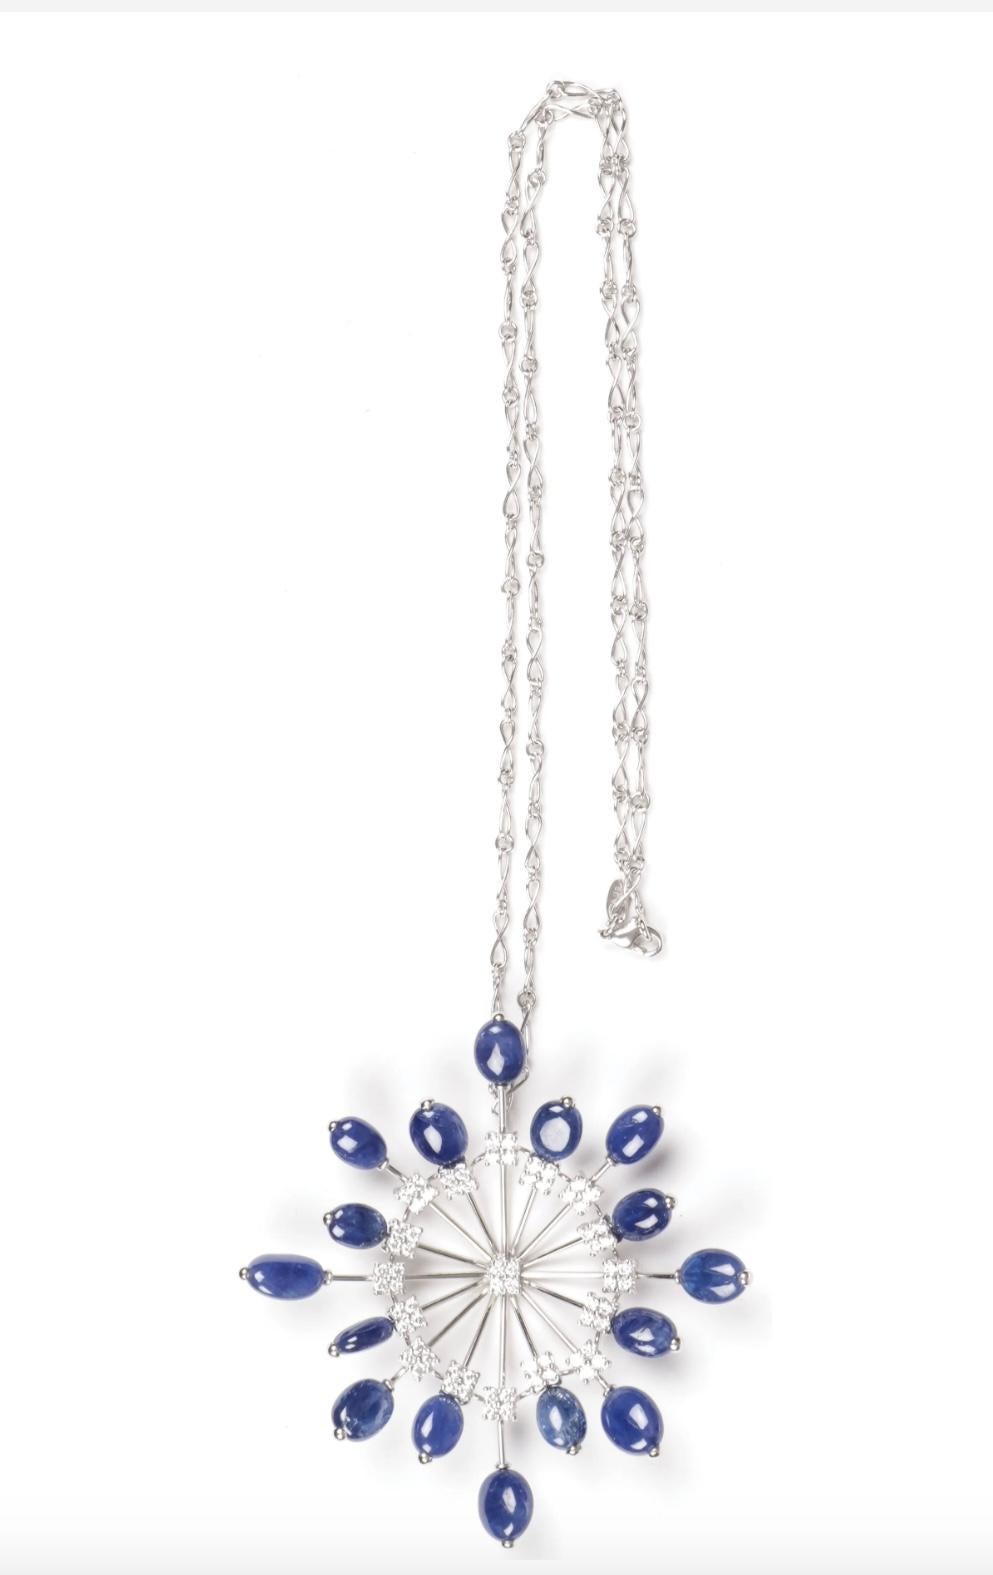 THIS IS A STUNNING MONUMENTAL ZYDO ITALIAN DIAMOND AND SAPPHIRE PENDANT NECKLACE IN 18 KARAT WHITE GOLD. 
The large and impressive pendant in the form of a magnificent starburst is set with 16 radiating oval cut sapphires and embellished with 68